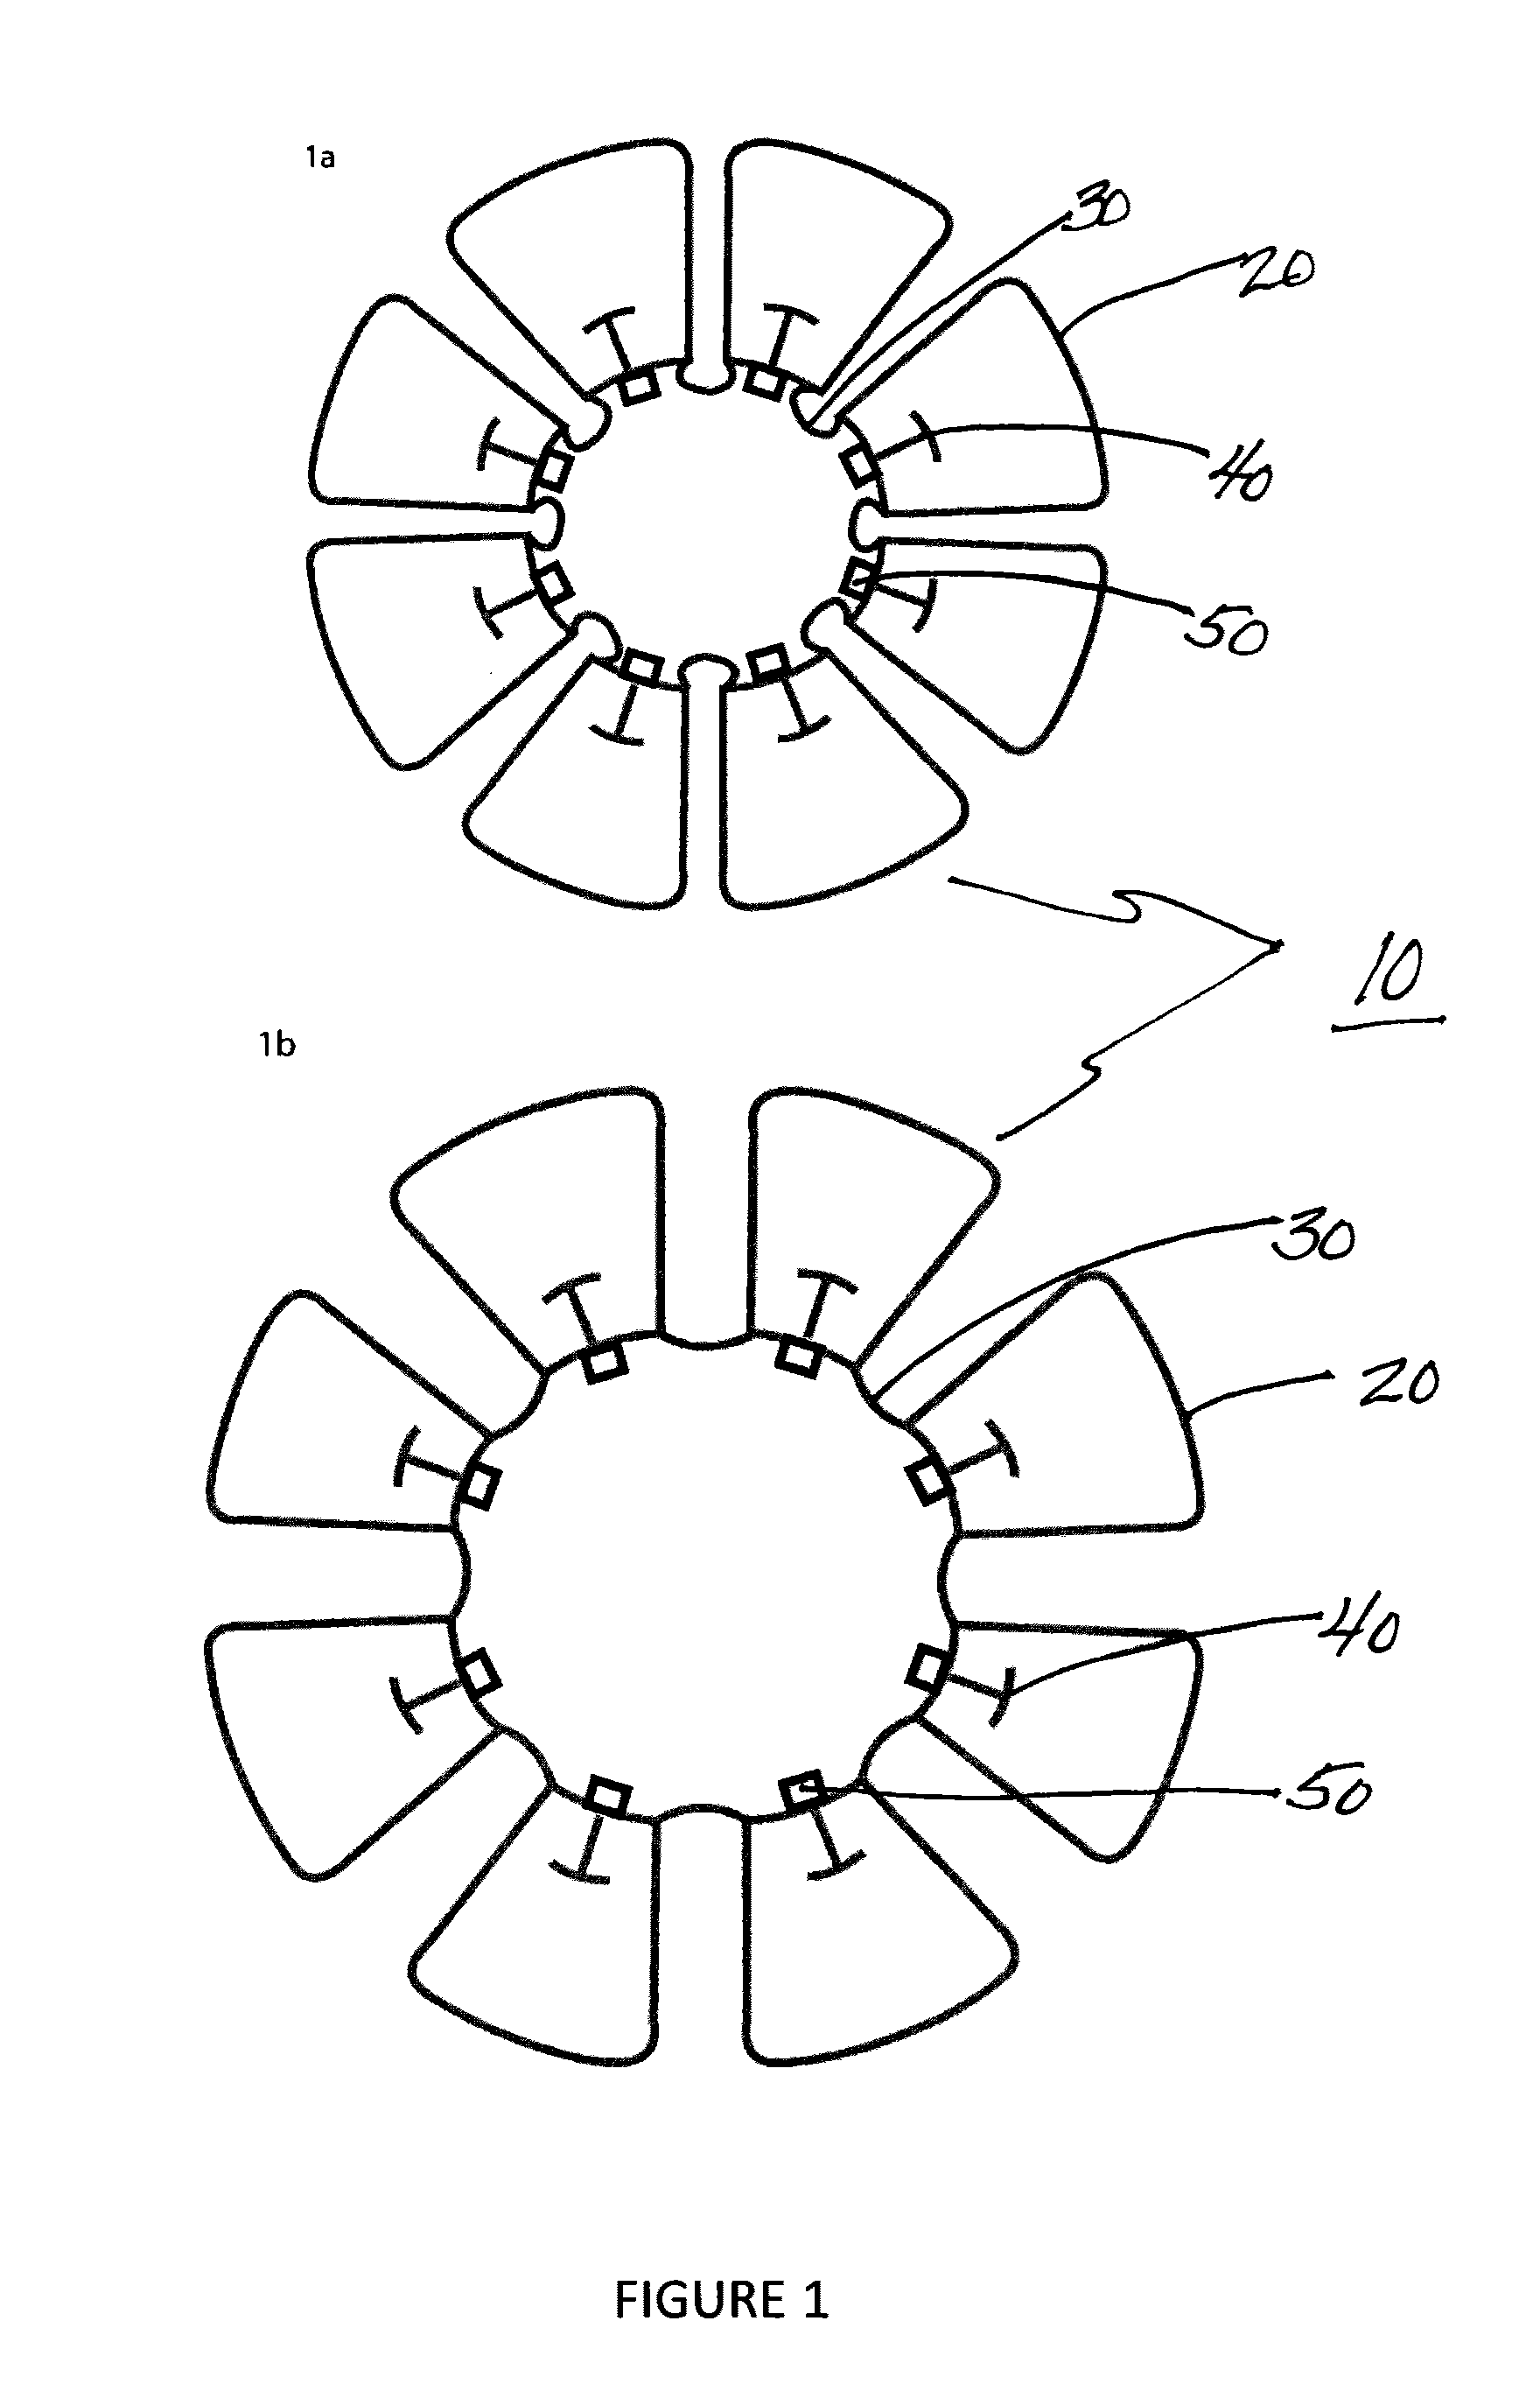 Accommodative intraocular lens and method of improving accommodation